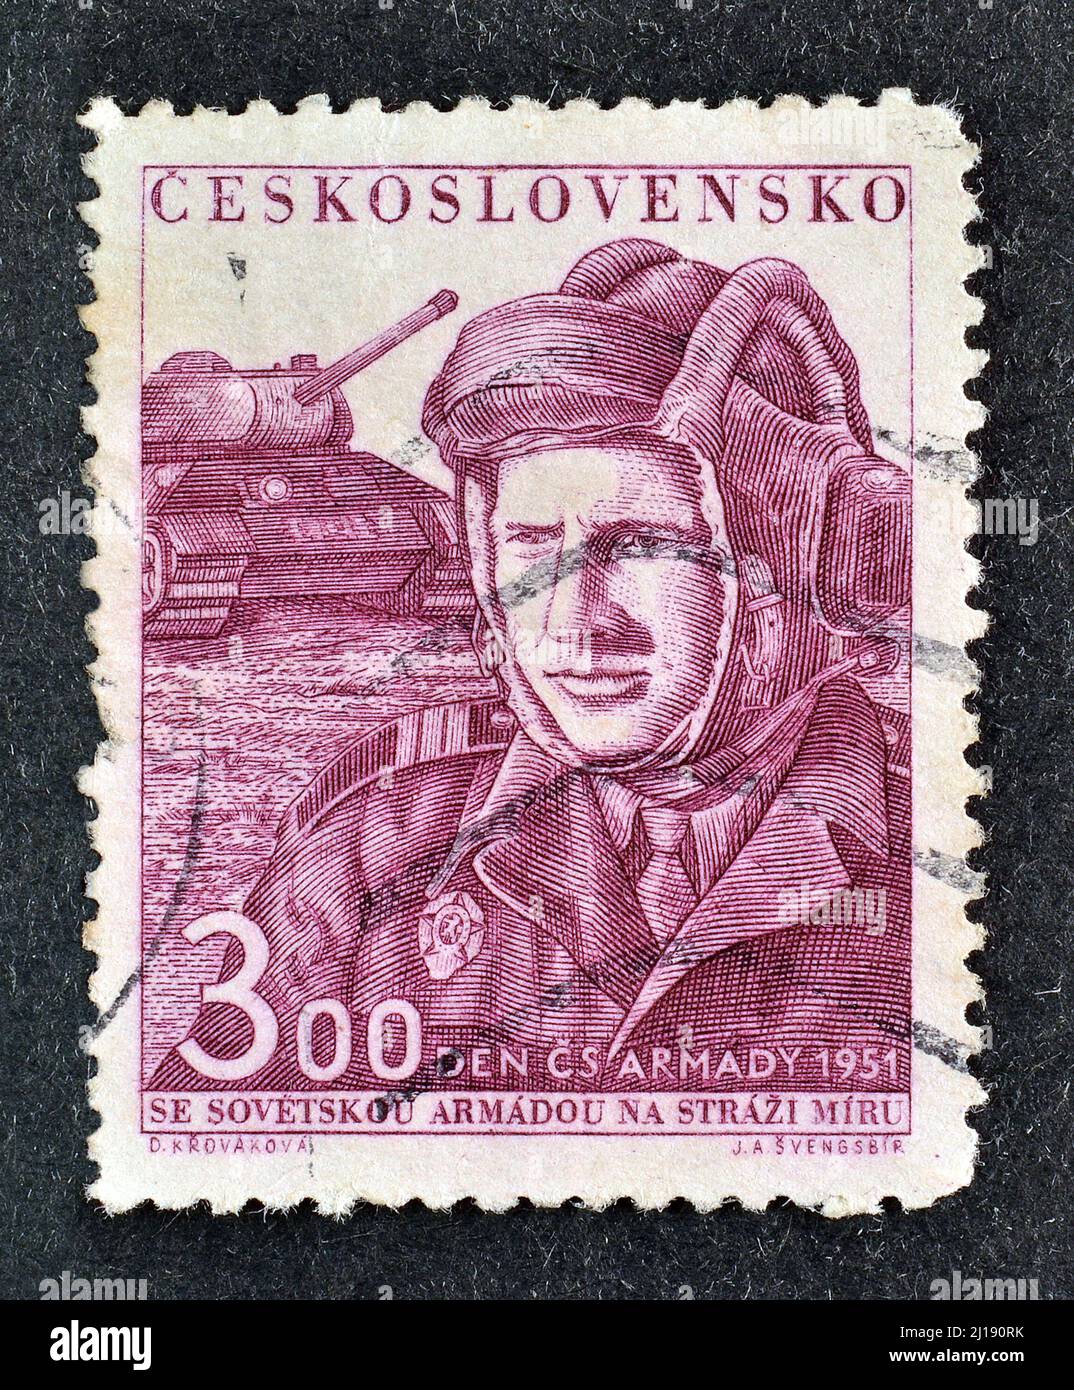 Cancelled postage stamp printed by Czechoslovakia, that shows Tankman and tank, Day of the Czechoslovak Army,  circa 1951. Stock Photo